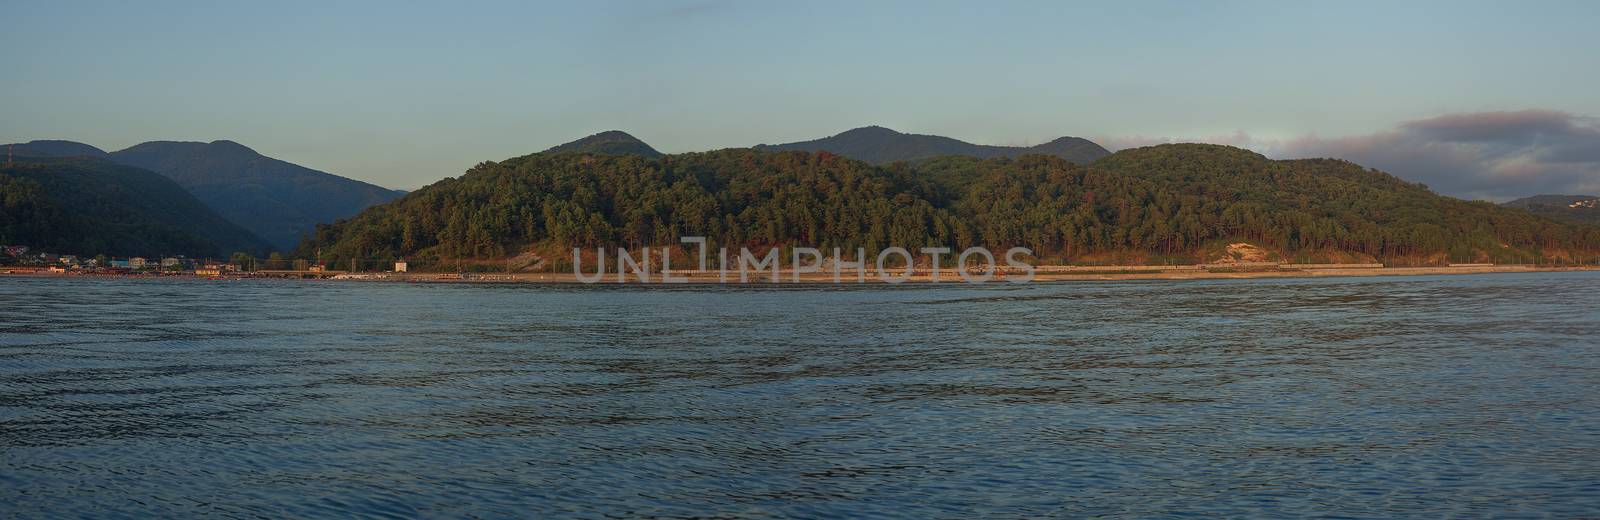 View on the mountains from the sea by Angorius